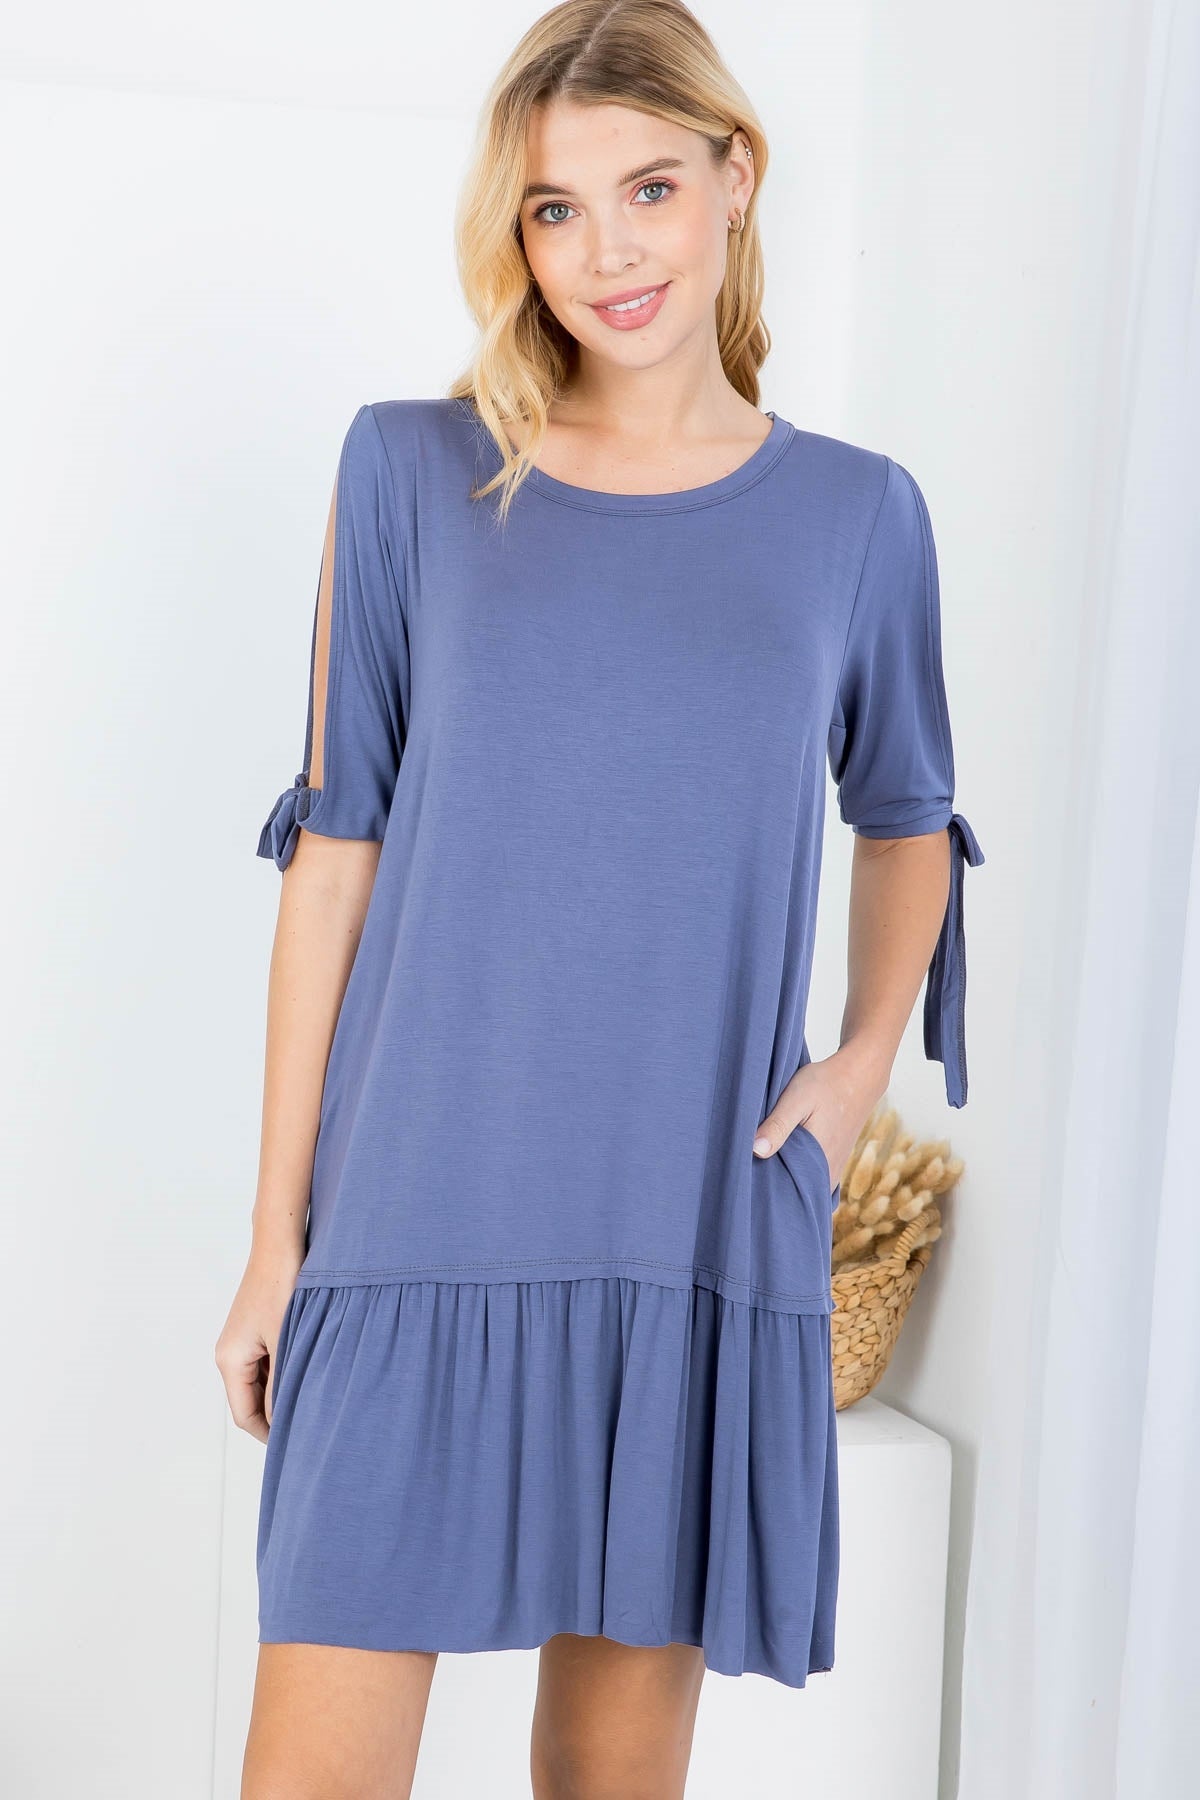 BLUE IRIS ROUND NECKLINE WITH SIDE POCKET COLD SHOULDER WITH TIE SLEEVE RUFFLE DRESS